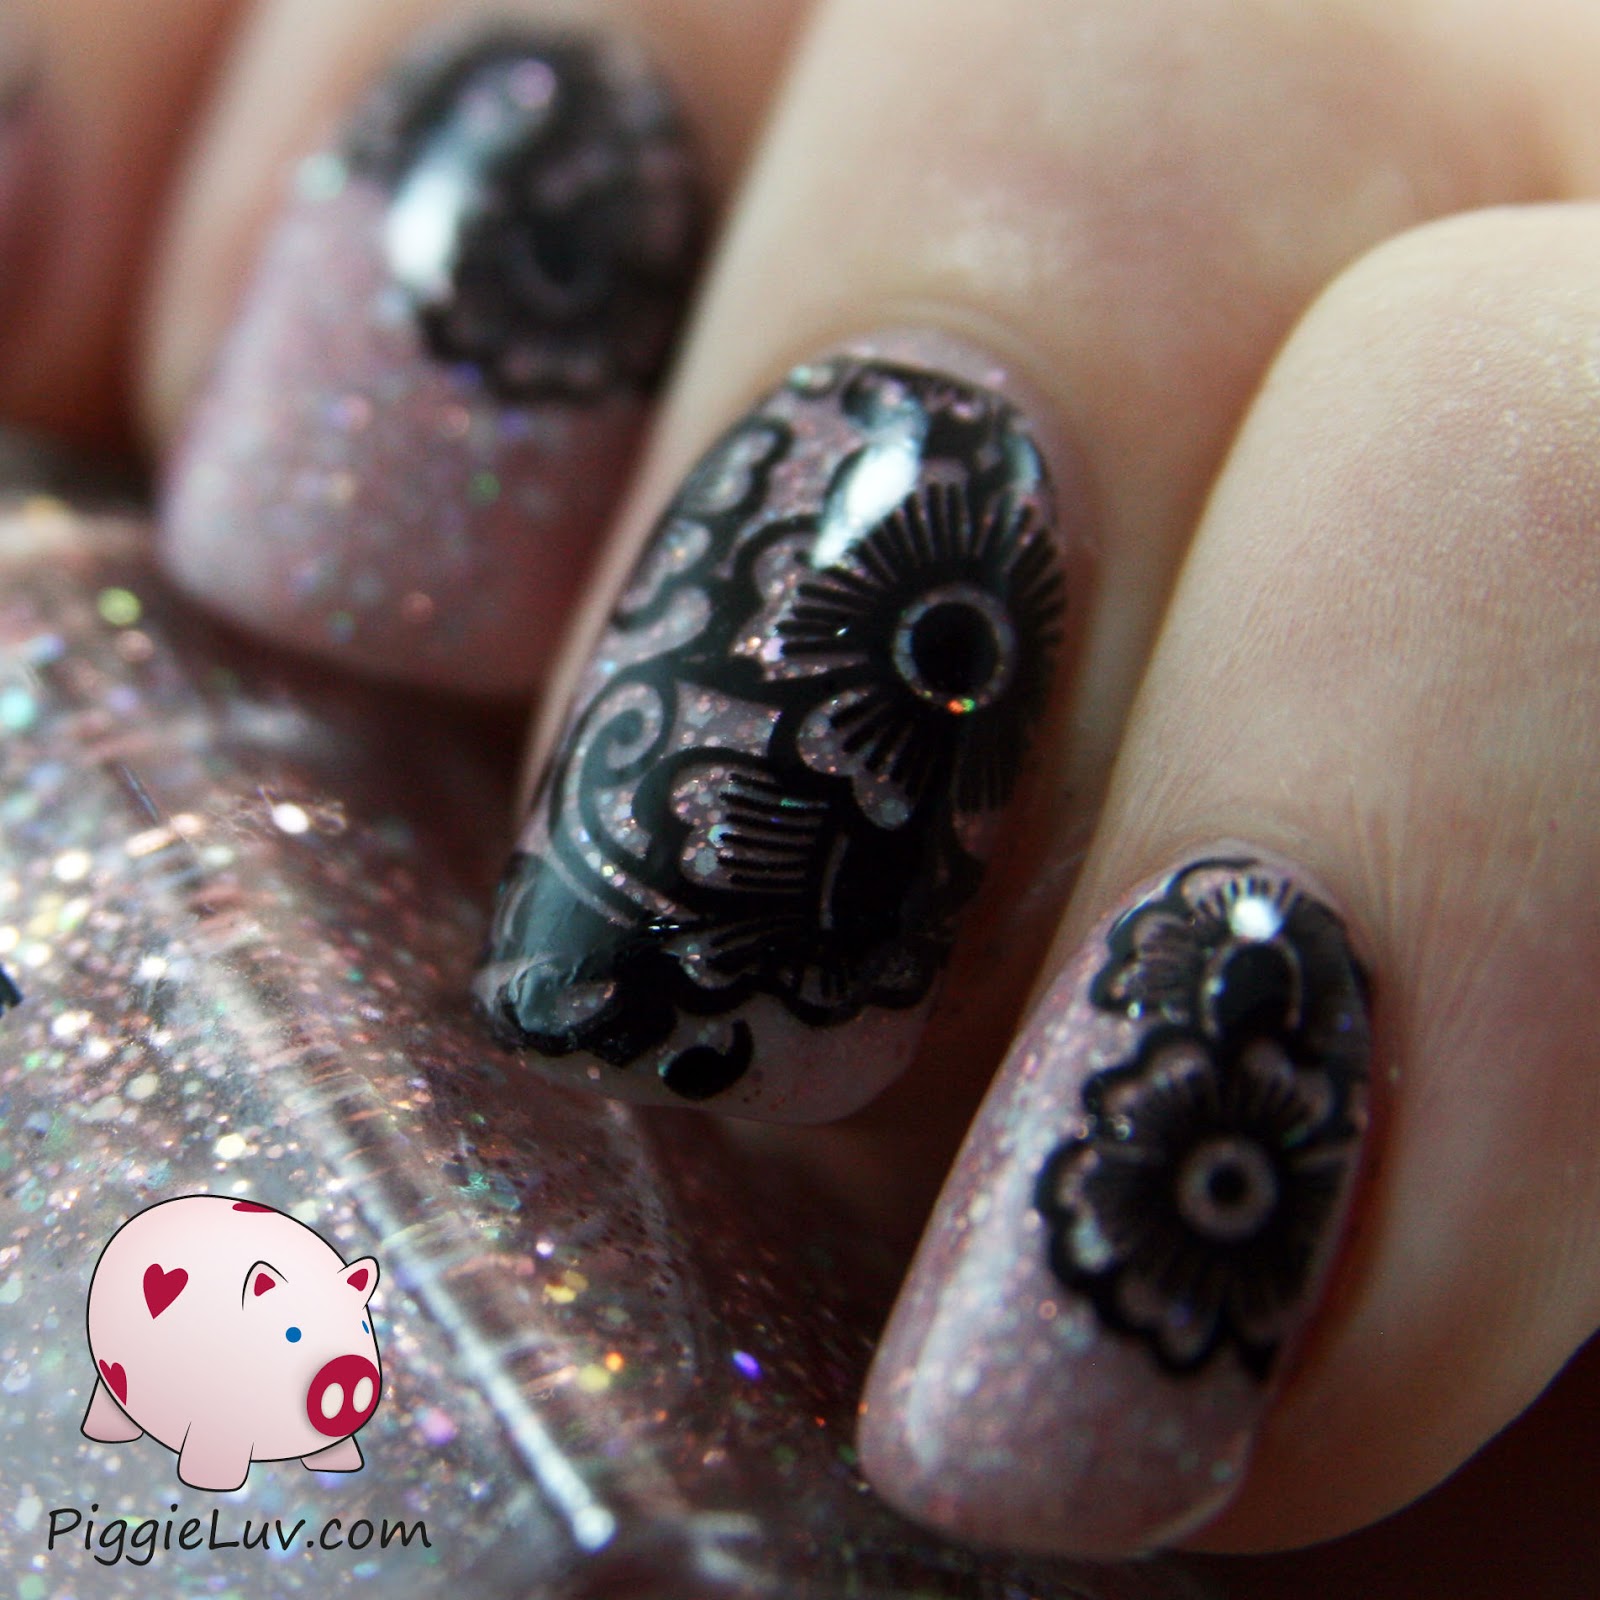 PiggieLuv: Look what I made with Kiss nail art pens!